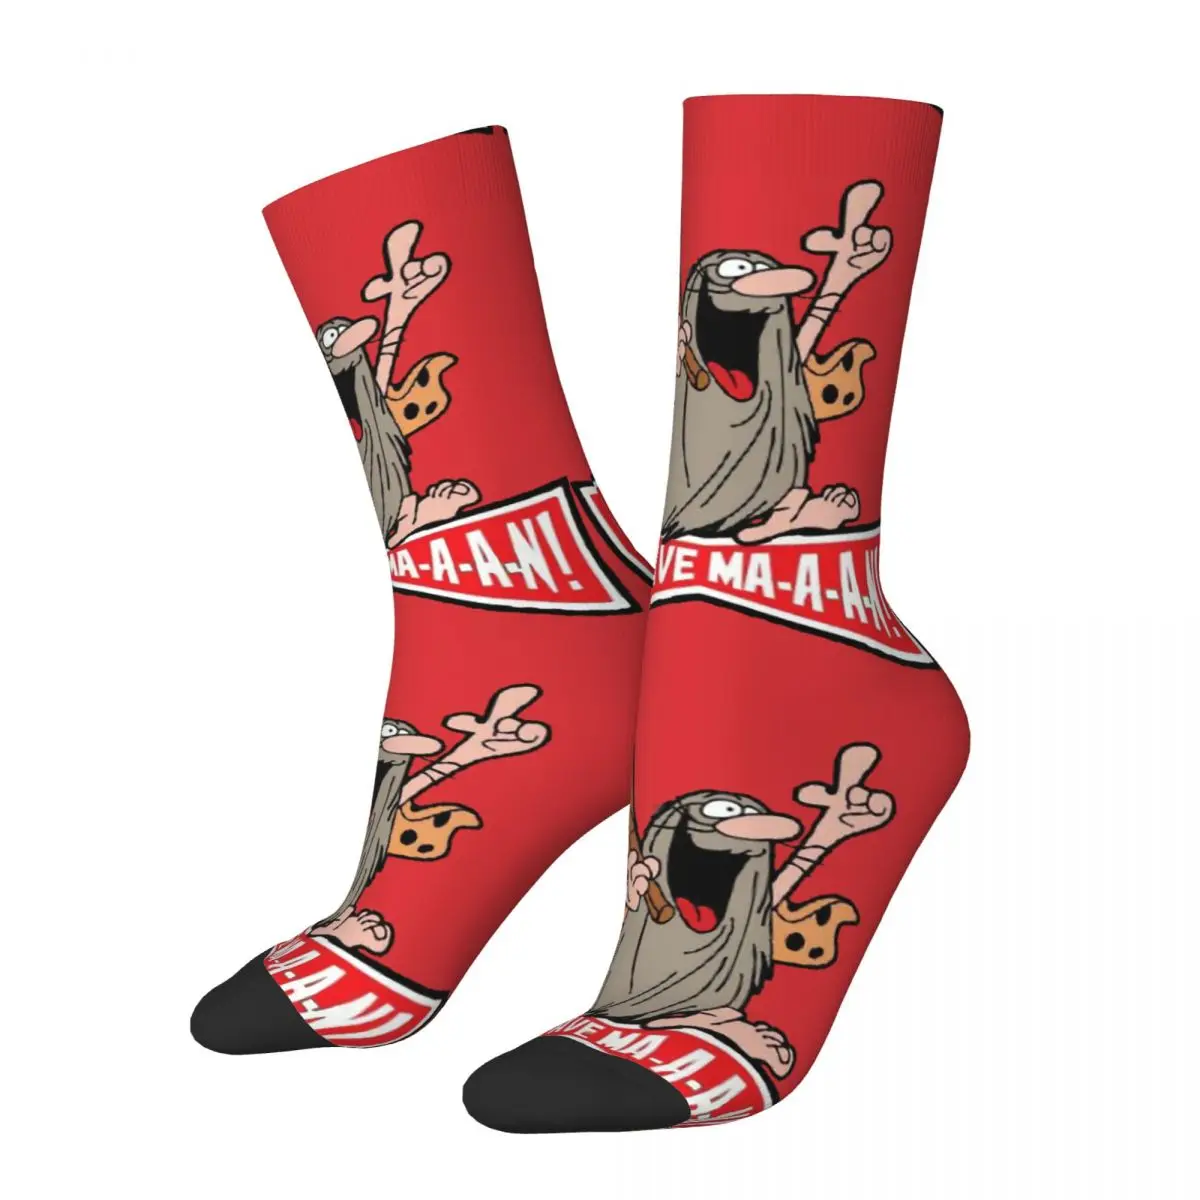 Funny Crazy Sock for Men Baton Hip Hop Vintage Captain Caveman and the Teen Angels Happy Quality Pattern Printed Boys Crew Sock